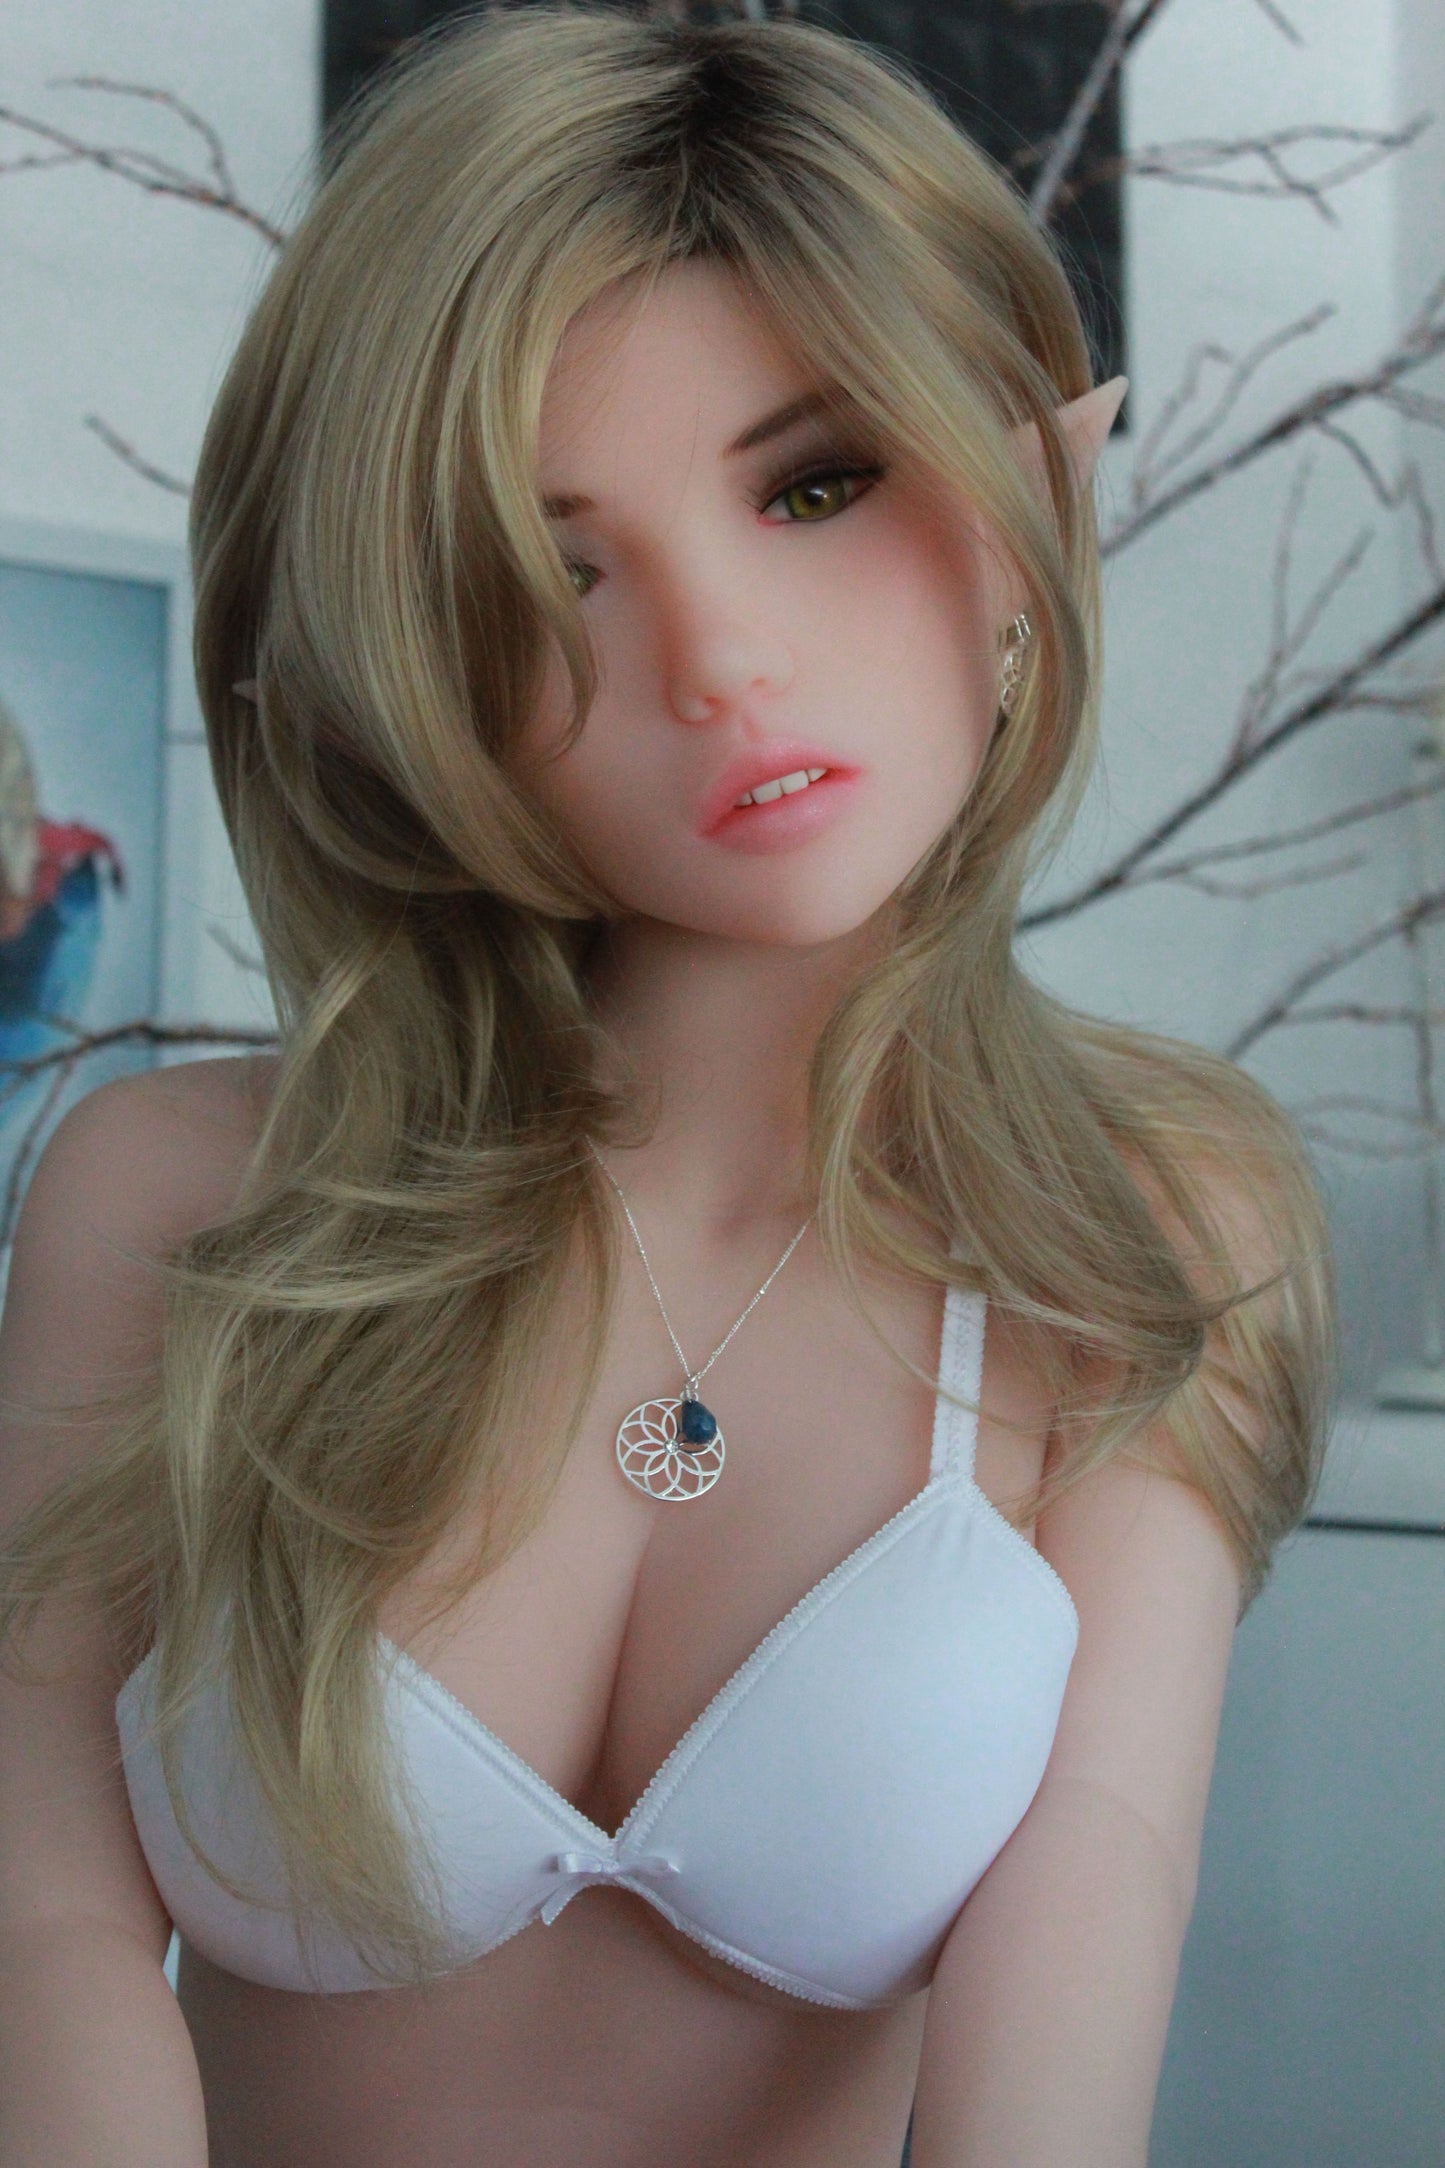 Doll Forever - Realistic Love Doll - 4ft 11in (150cm) - Brianna - Love Dolls 4U